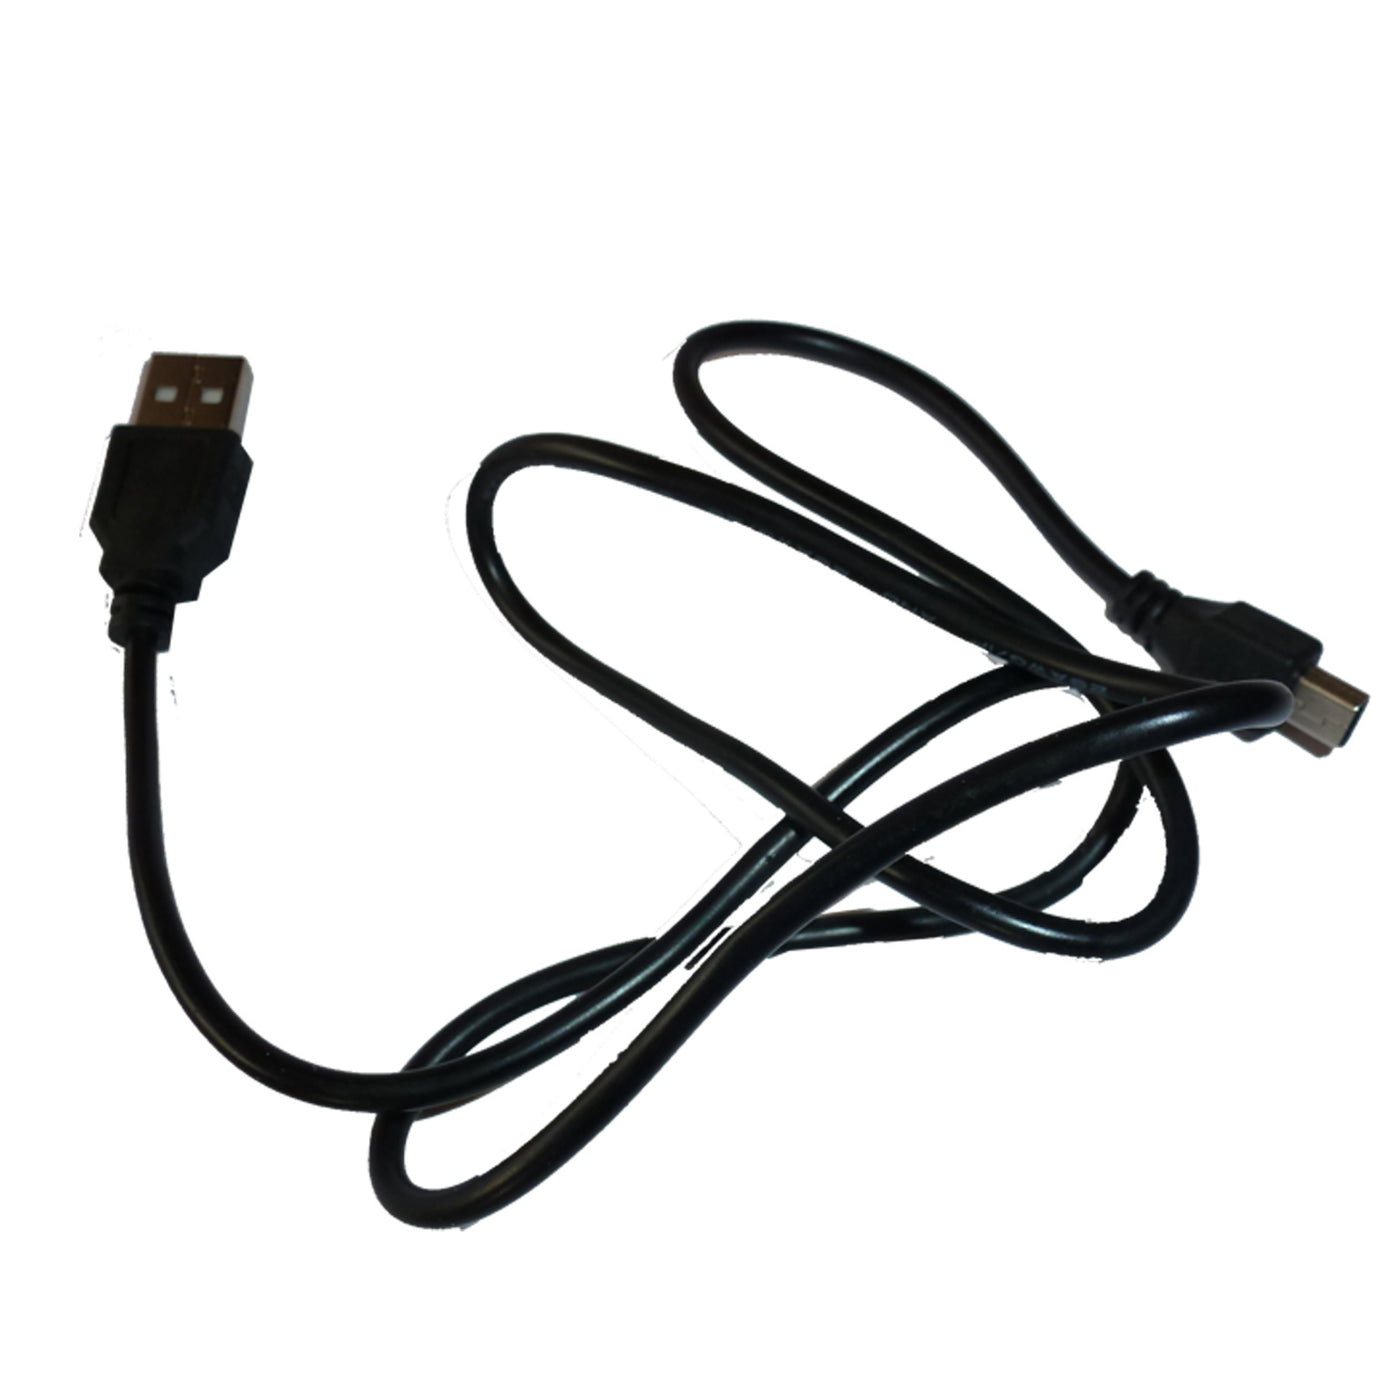 USB cable for PASSEPASSE or iG-LIGHT diabolo light system